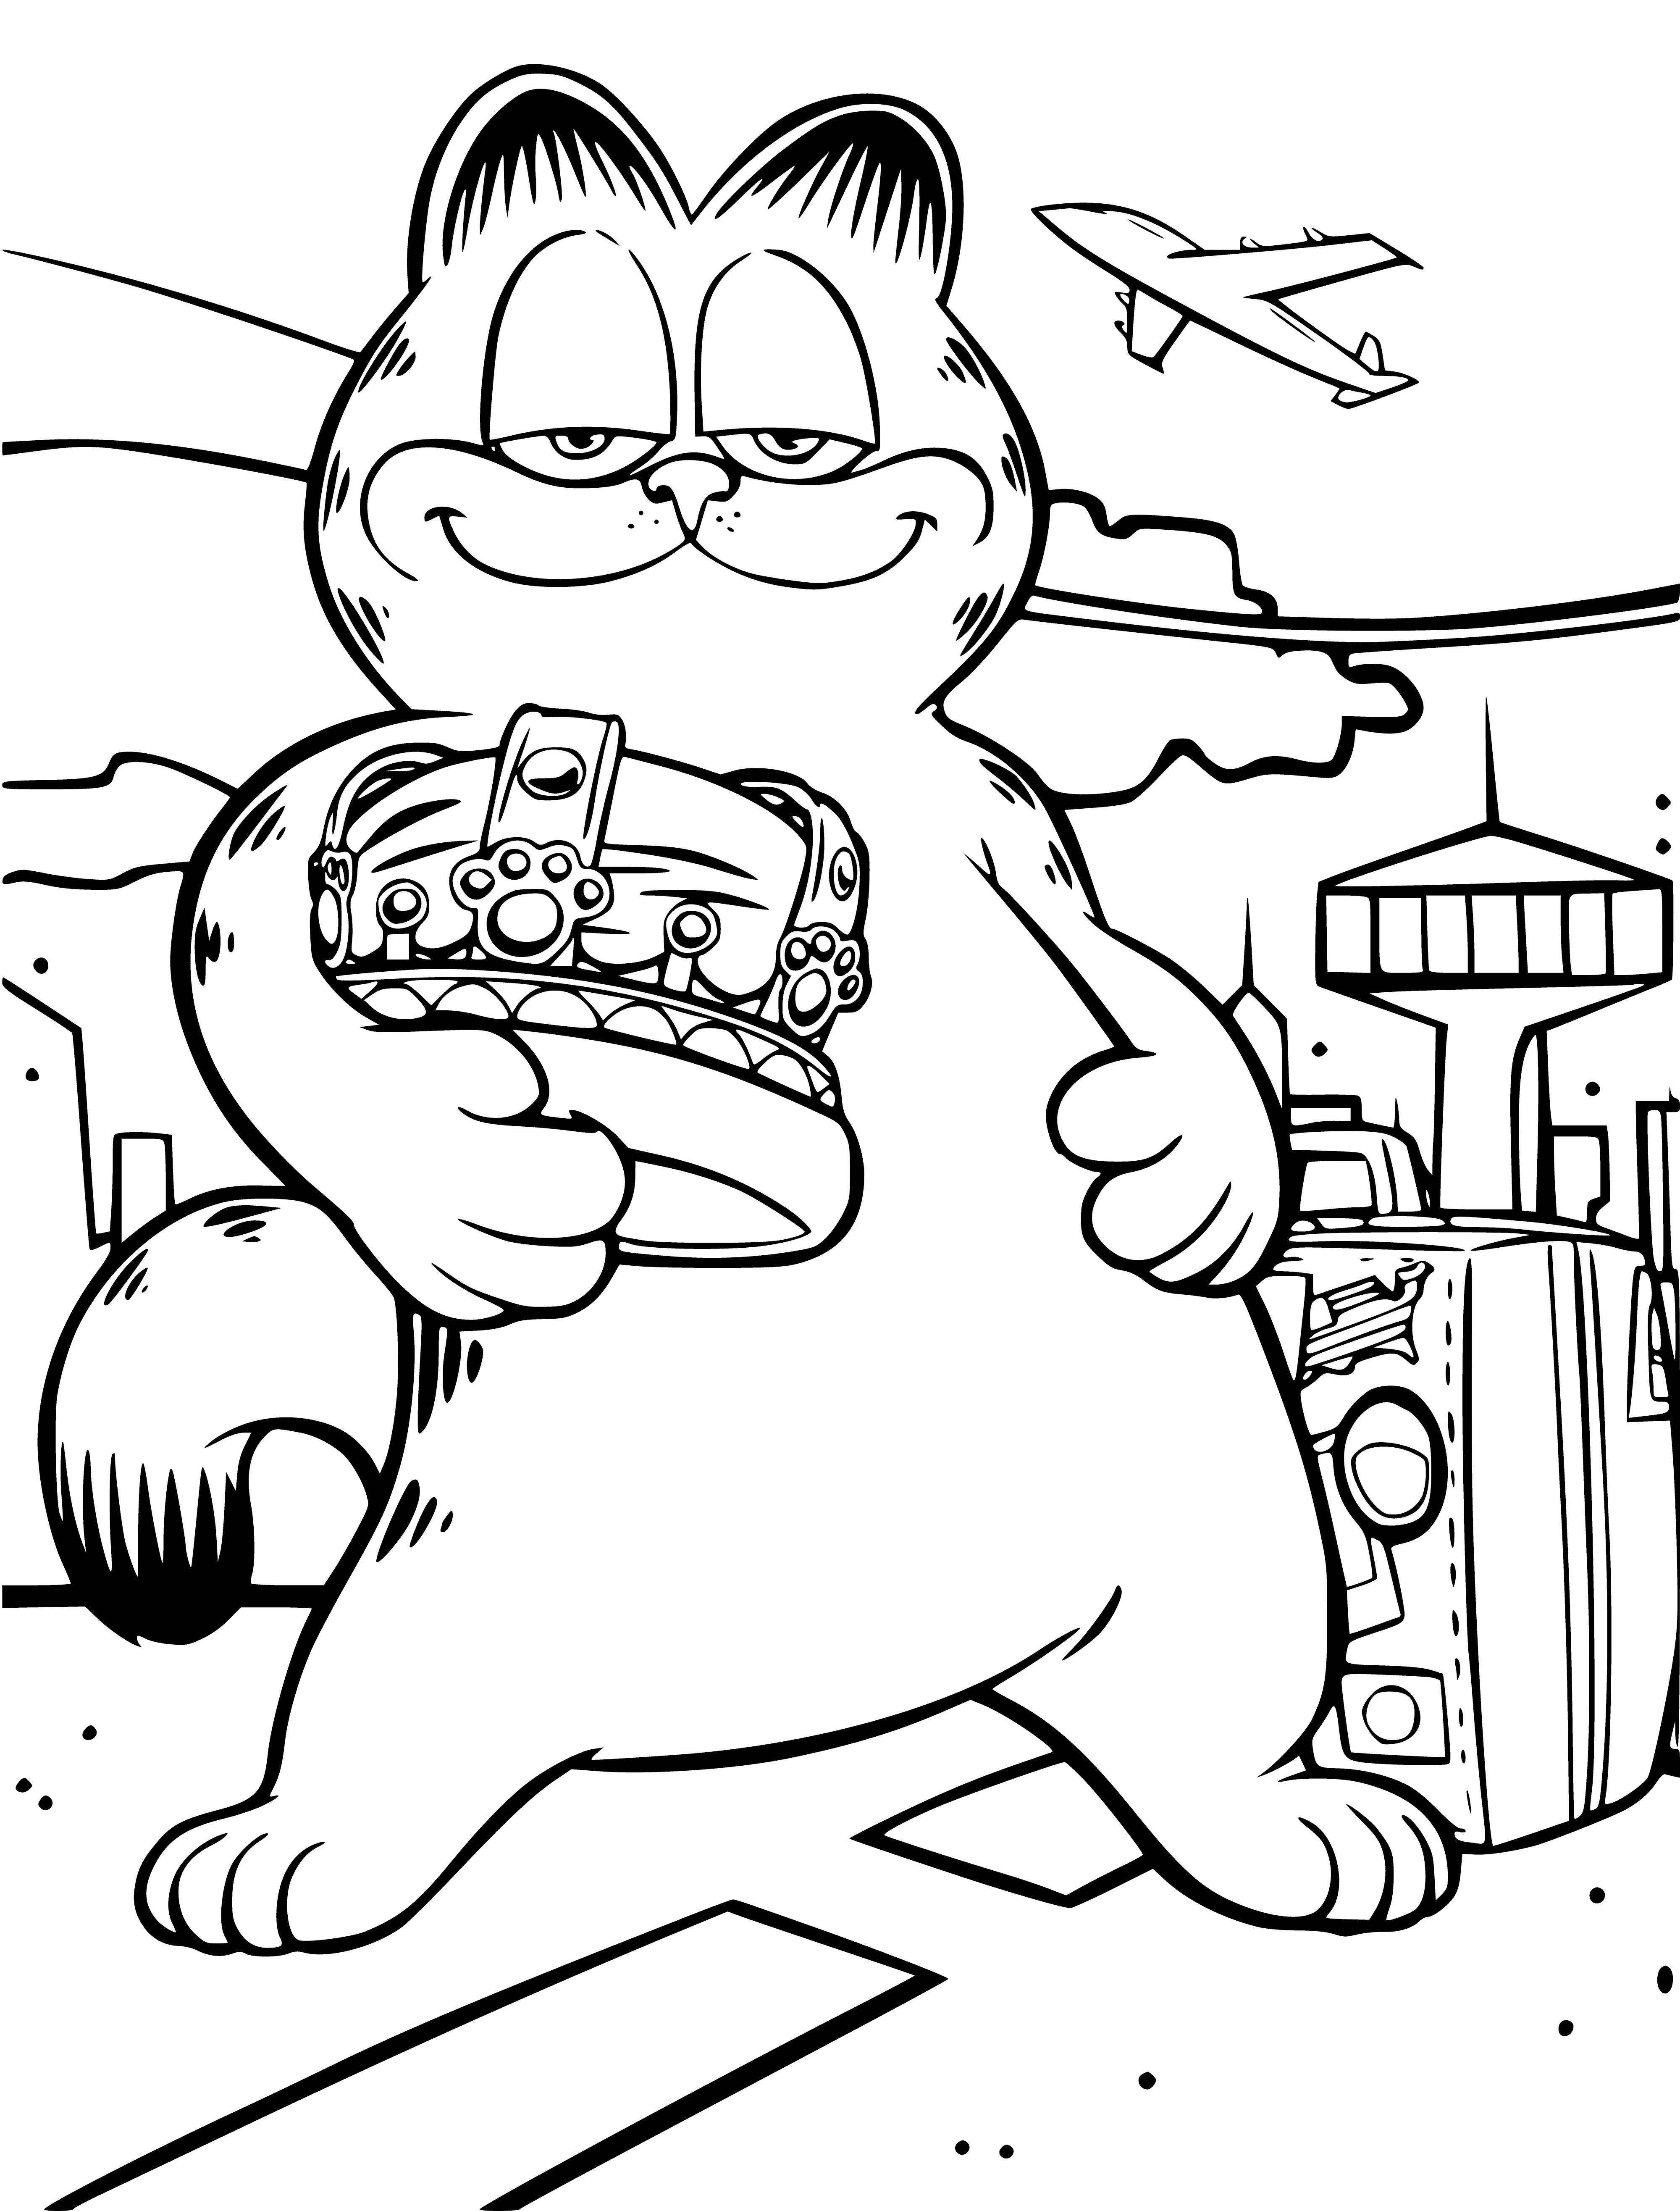 Super chat Garfield coloriage